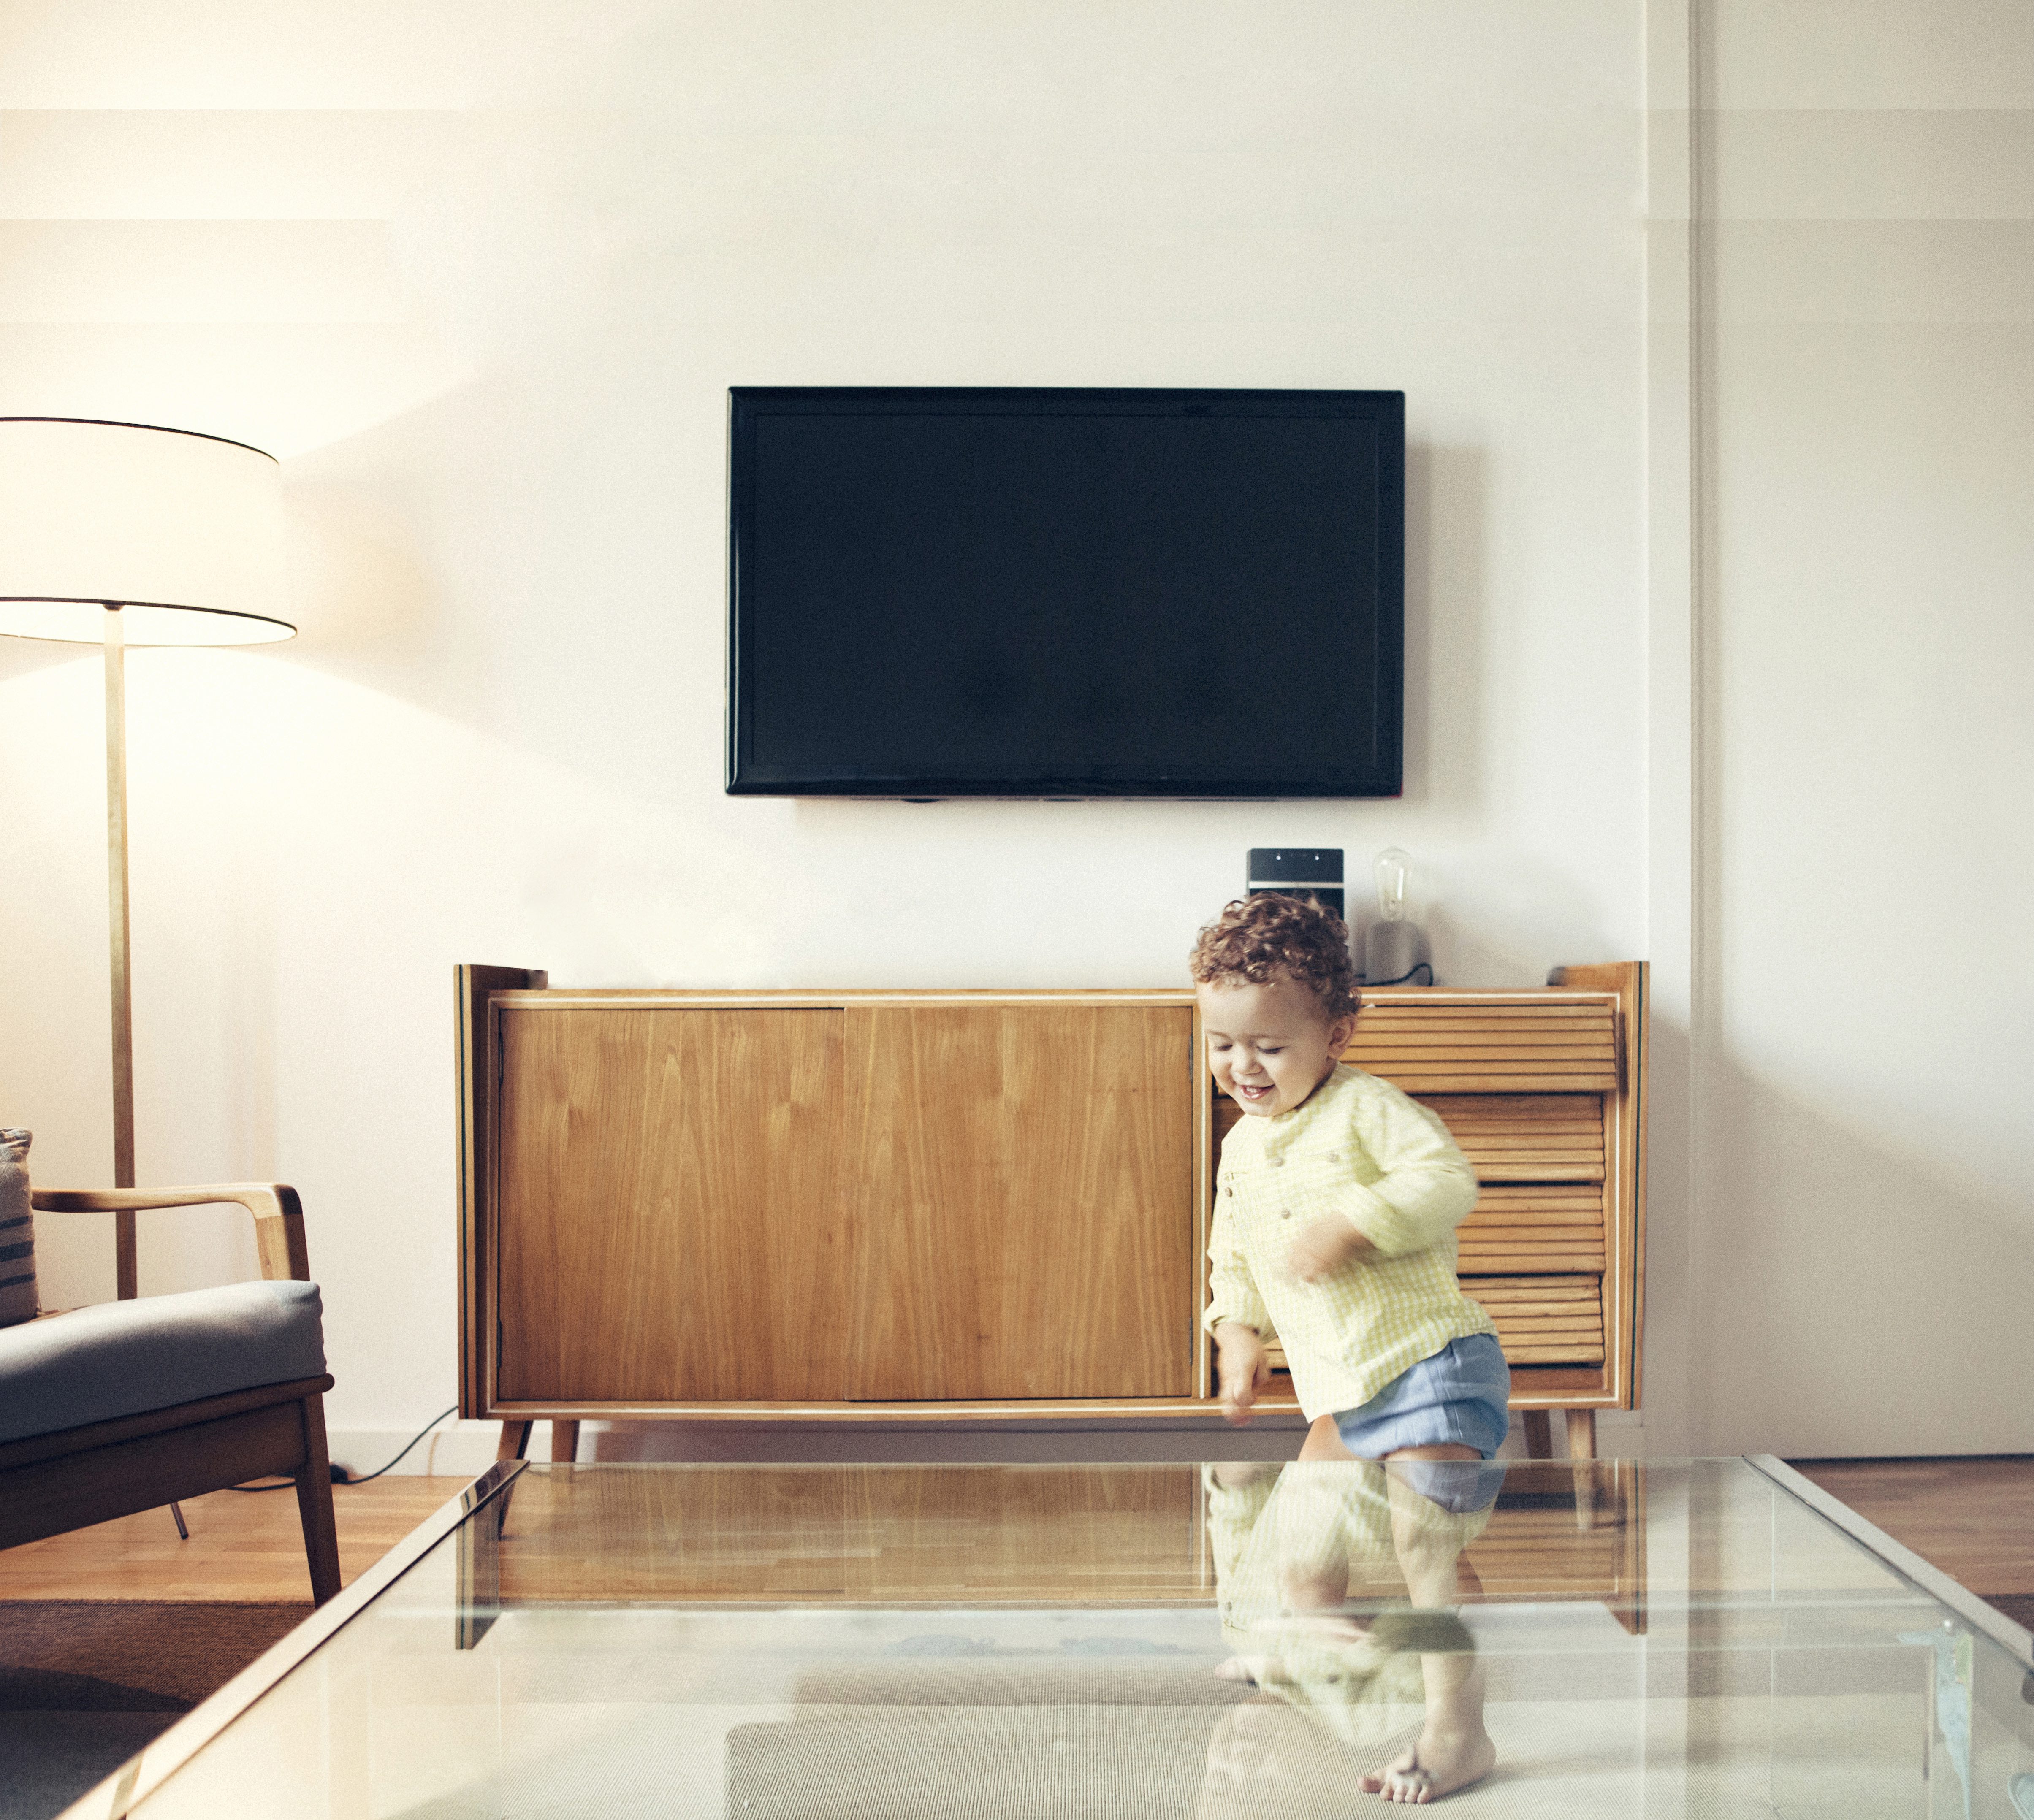 Baby proofing your TV